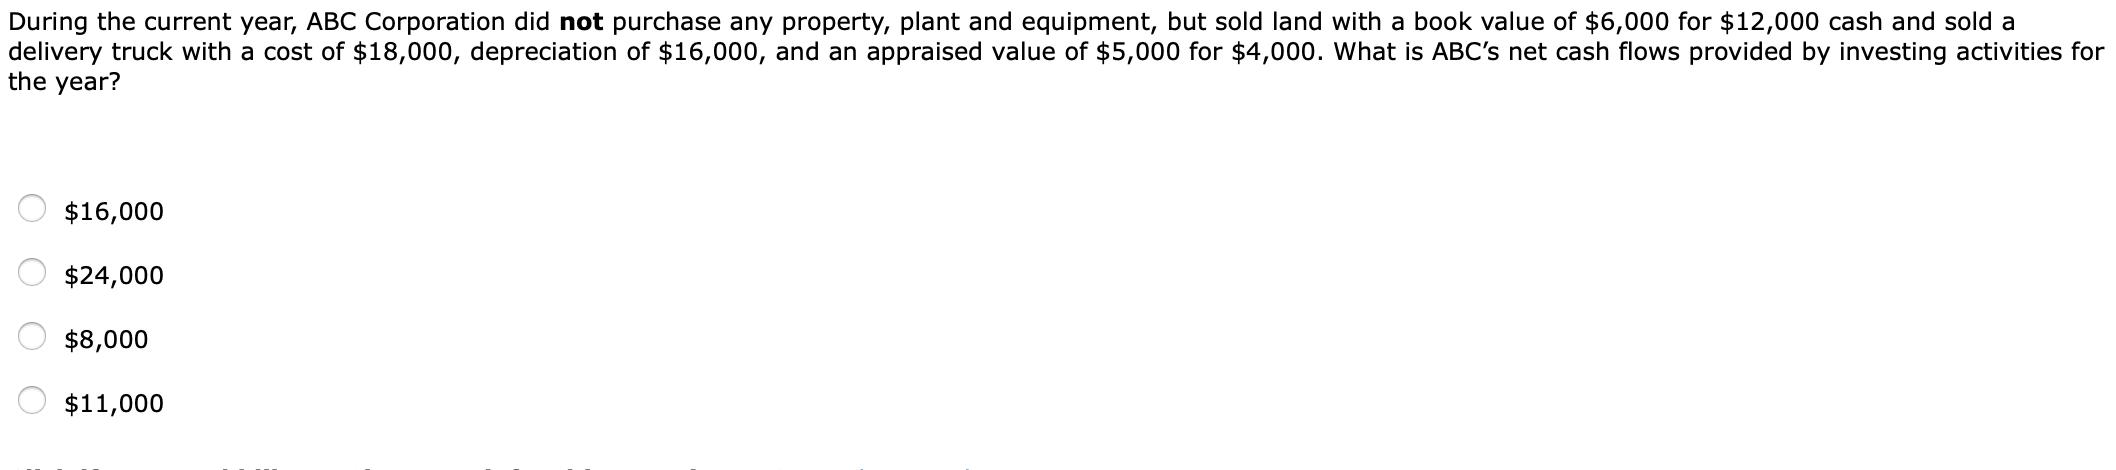 During the current year, ABC Corporation did not purchase any property, plant and equipment, but sold land with a book value